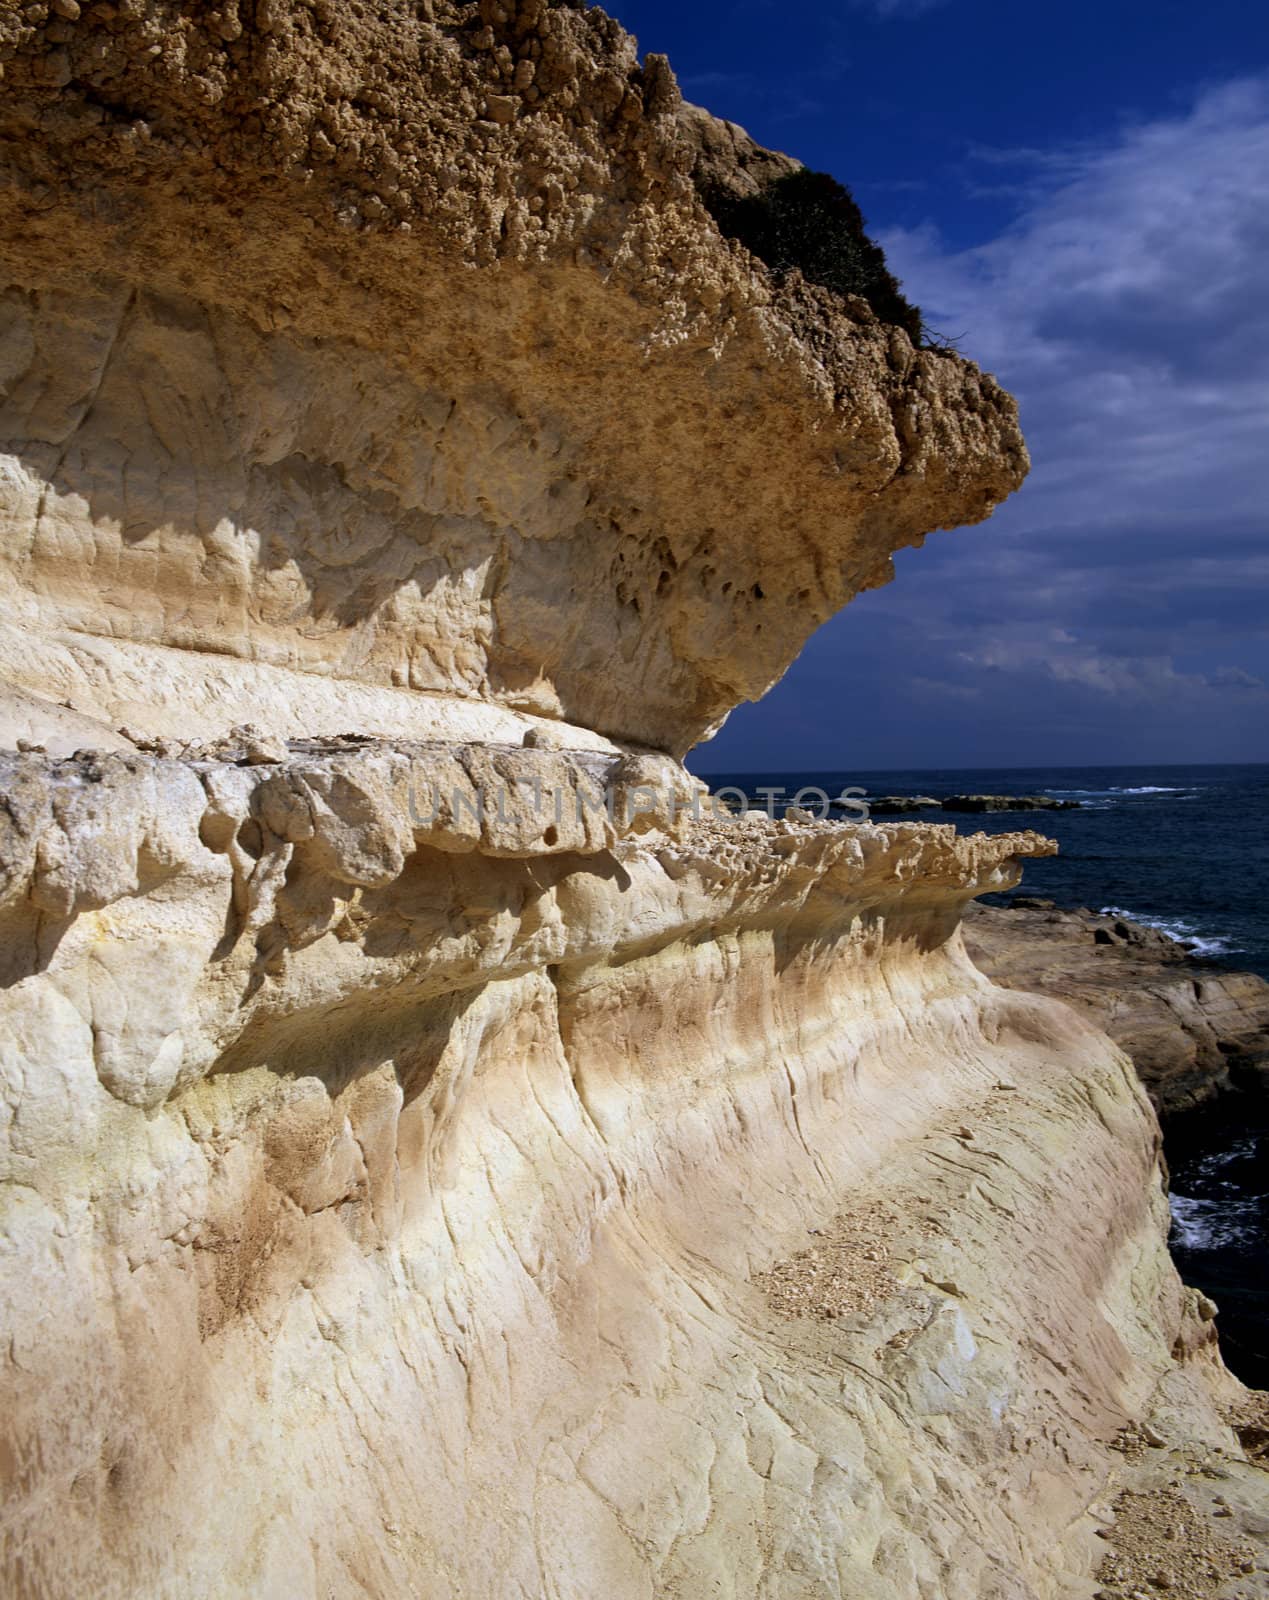 Eroded limestone cliff face in northern Cyprus